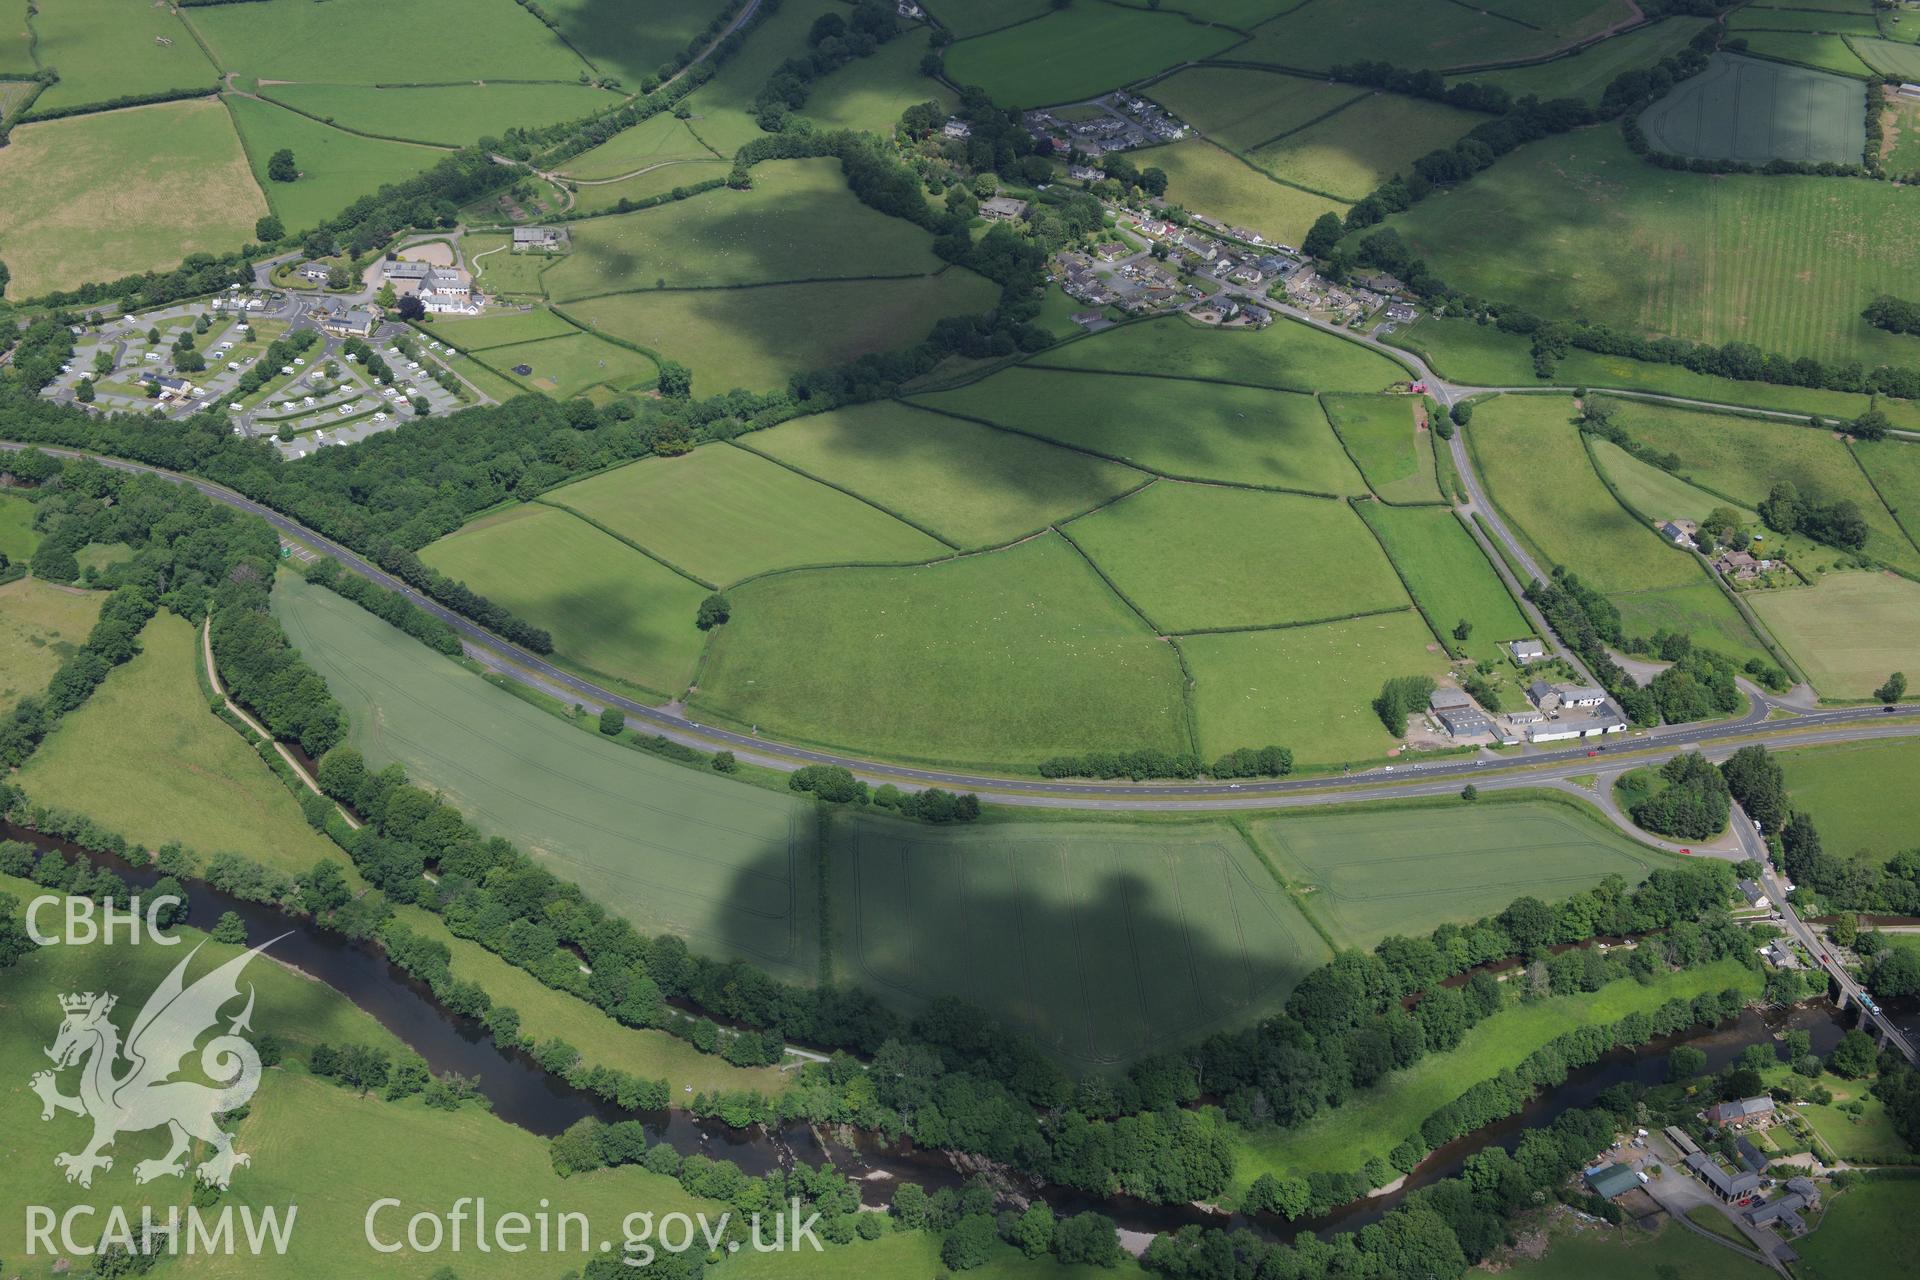 Cefn-Brynich Roman Fort, near Brecon. Oblique aerial photograph taken during the Royal Commission's programme of archaeological aerial reconnaissance by Toby Driver on 29th June 2015.